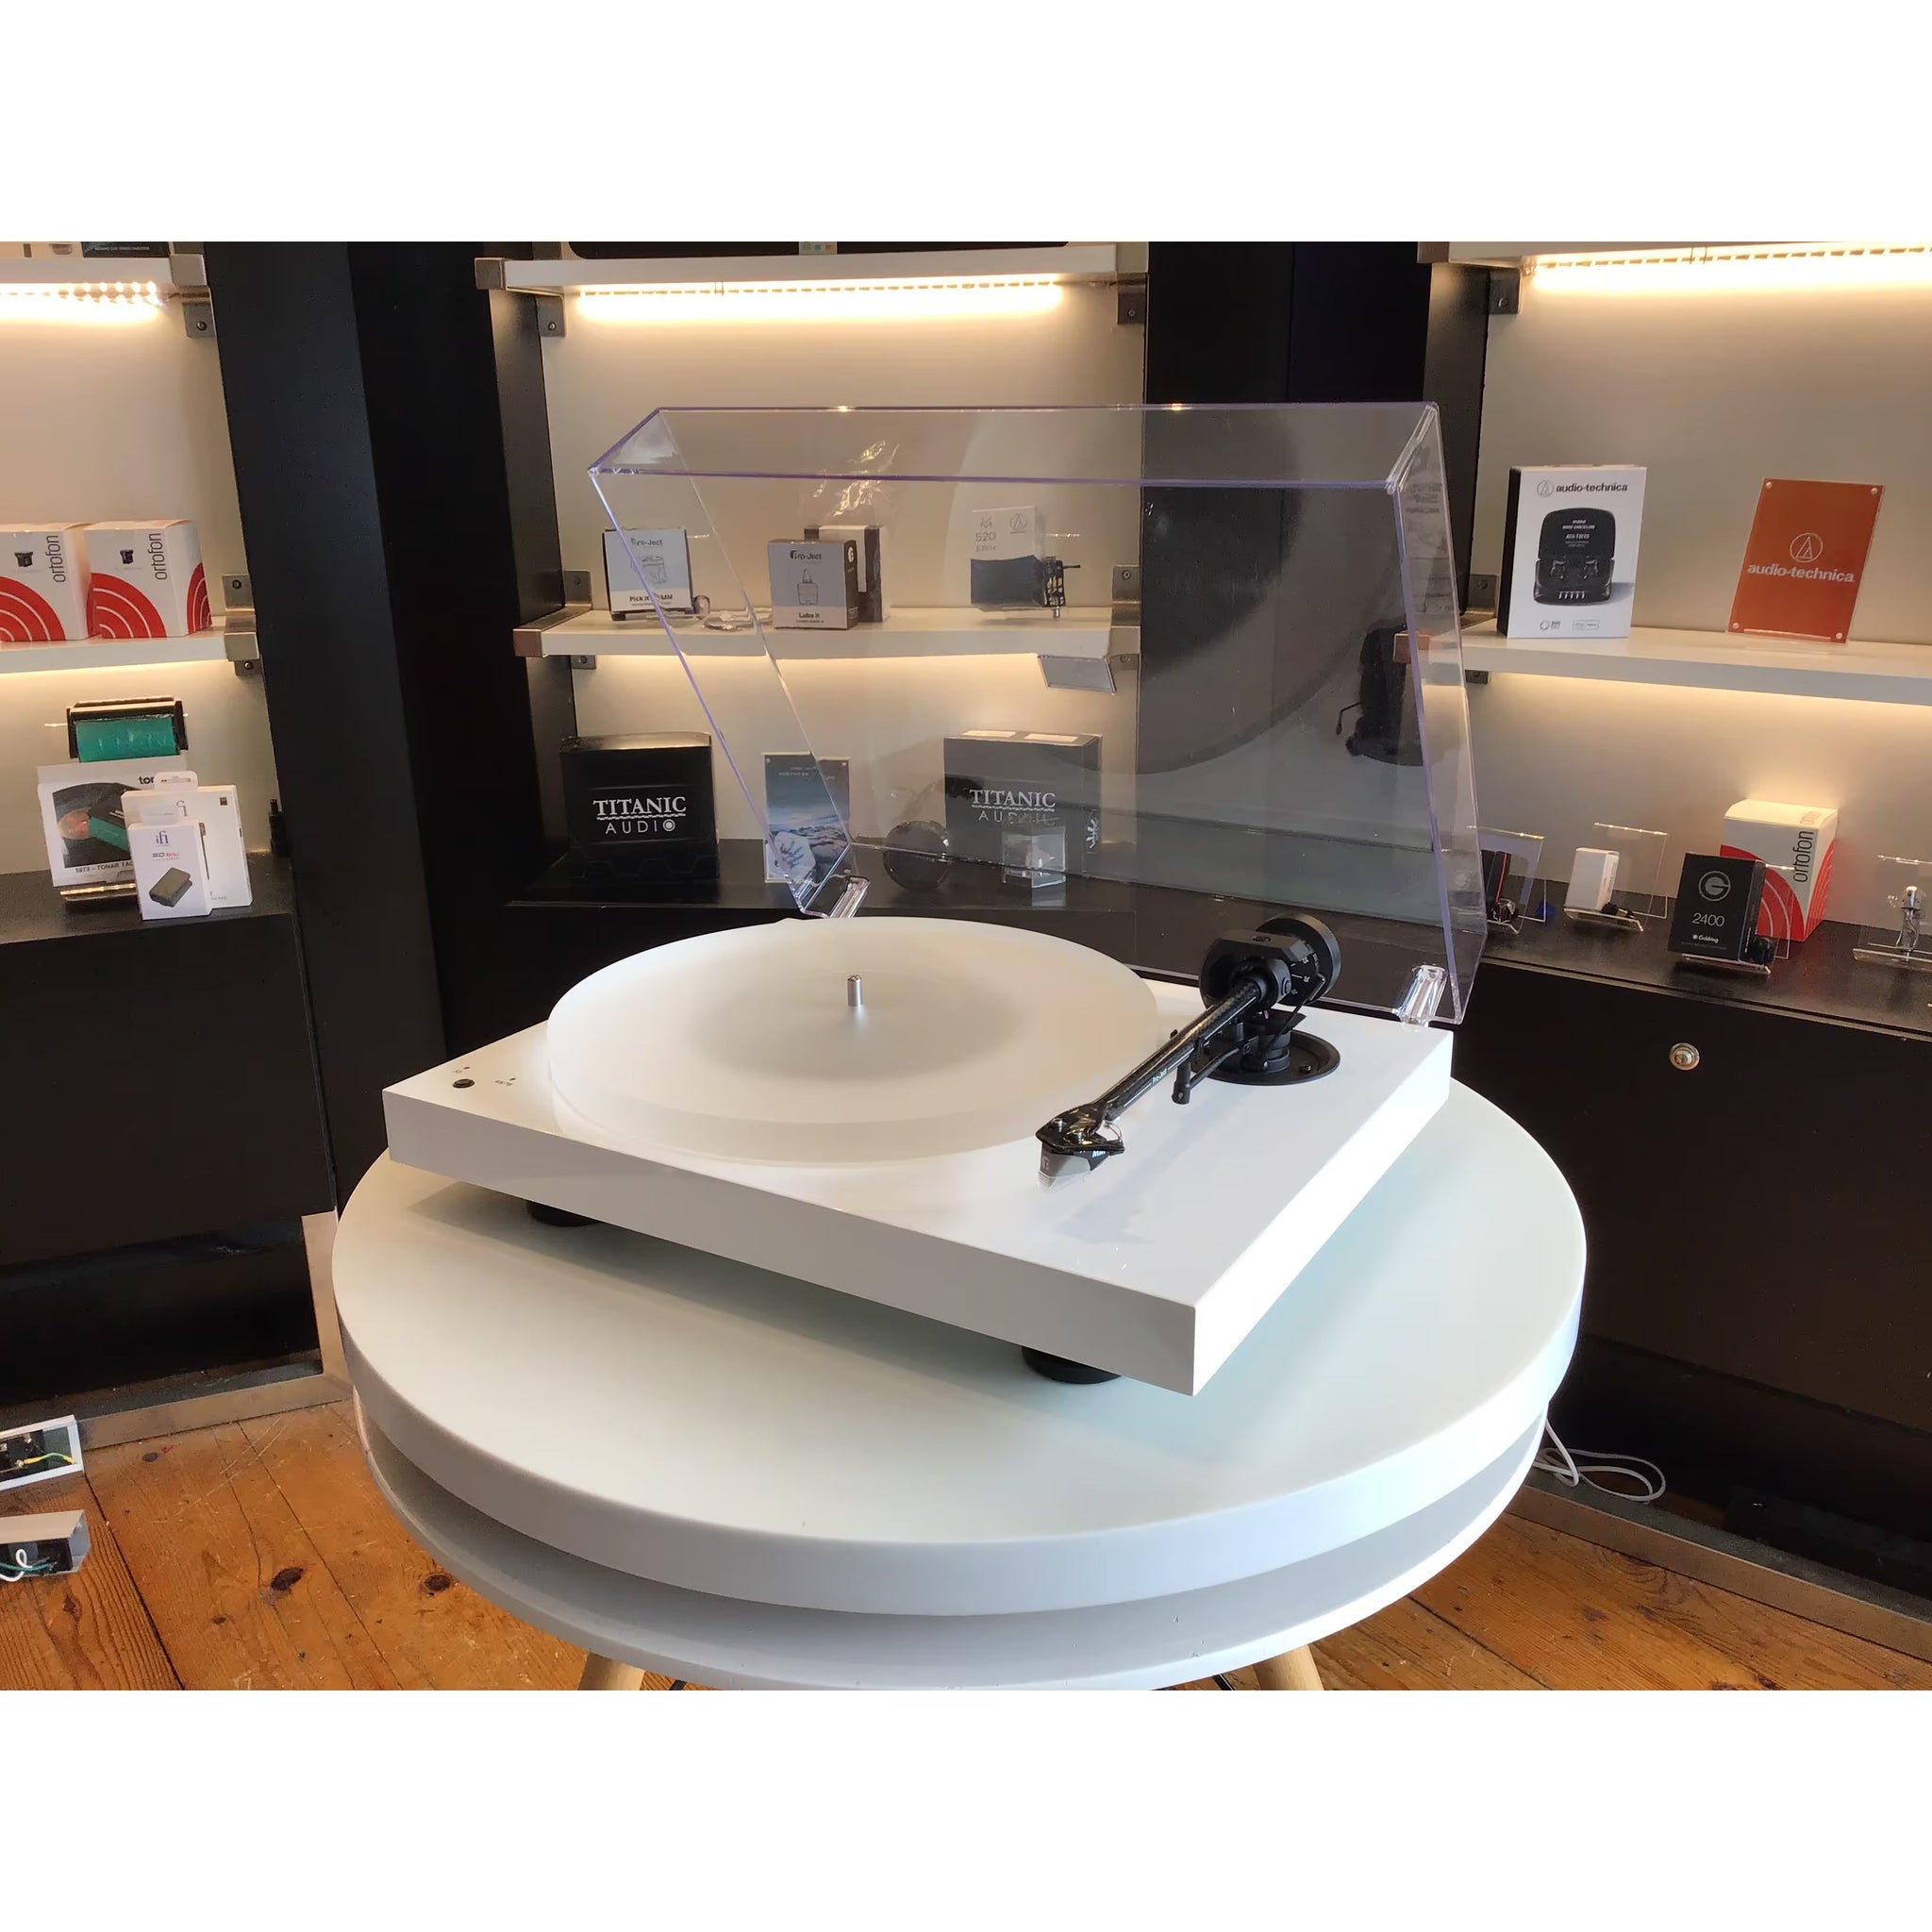 Pro-Ject X1 Turntable - Gloss White - Ex Demo